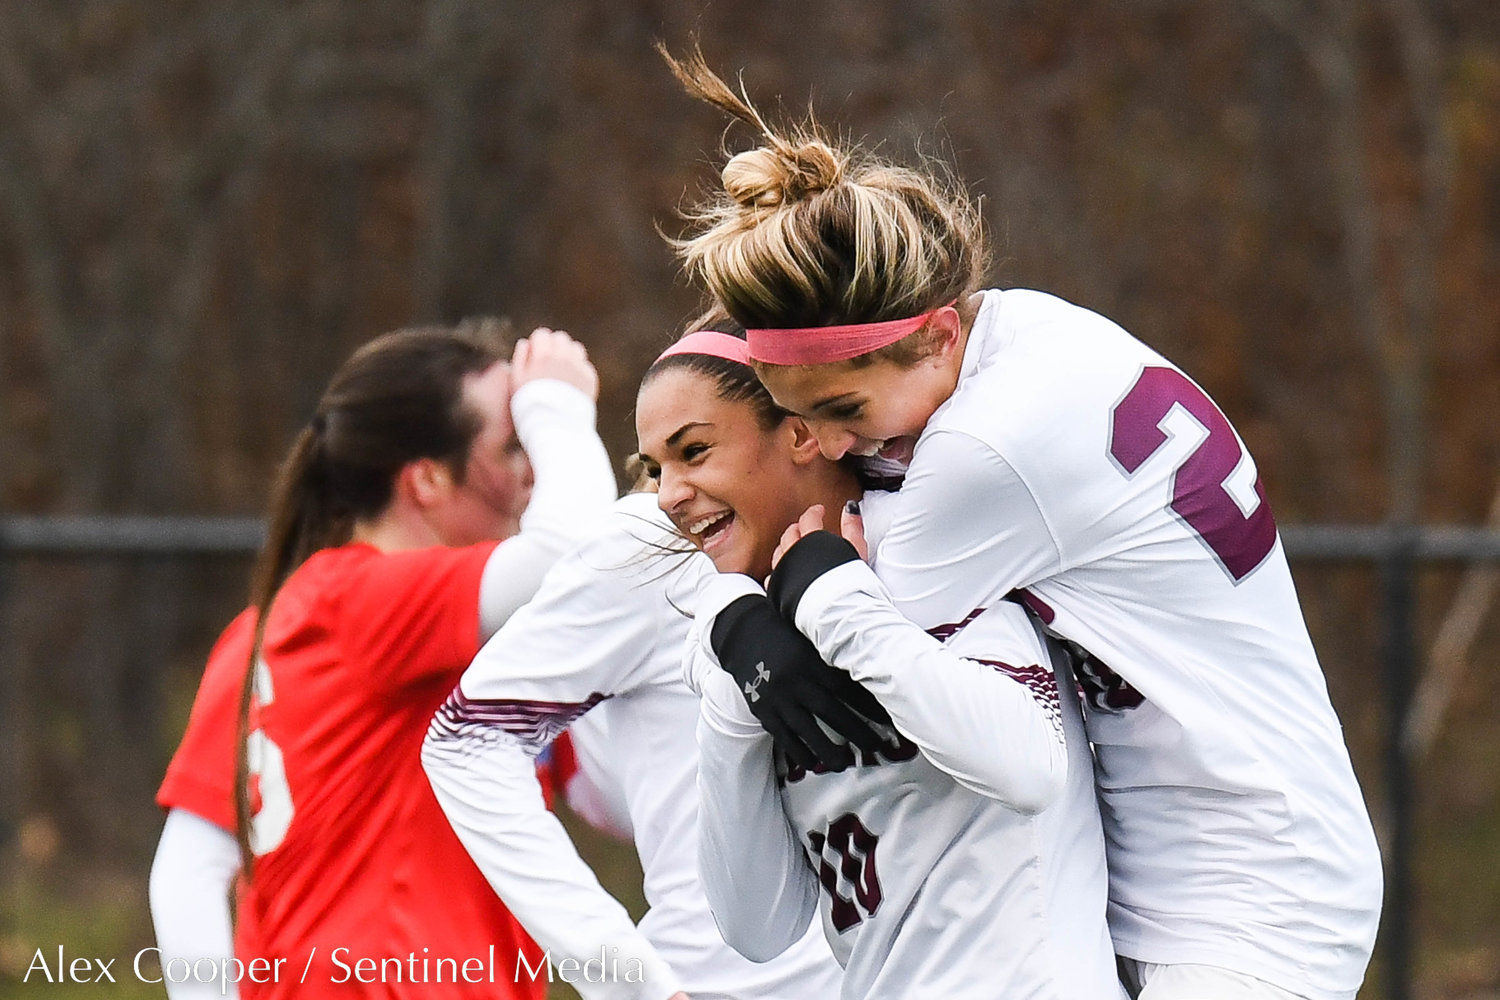 Albertus Magnus players celebrate after scoring a goal in the Class A state final against New Hartford on Sunday at Tompkins-Cortland Community College.